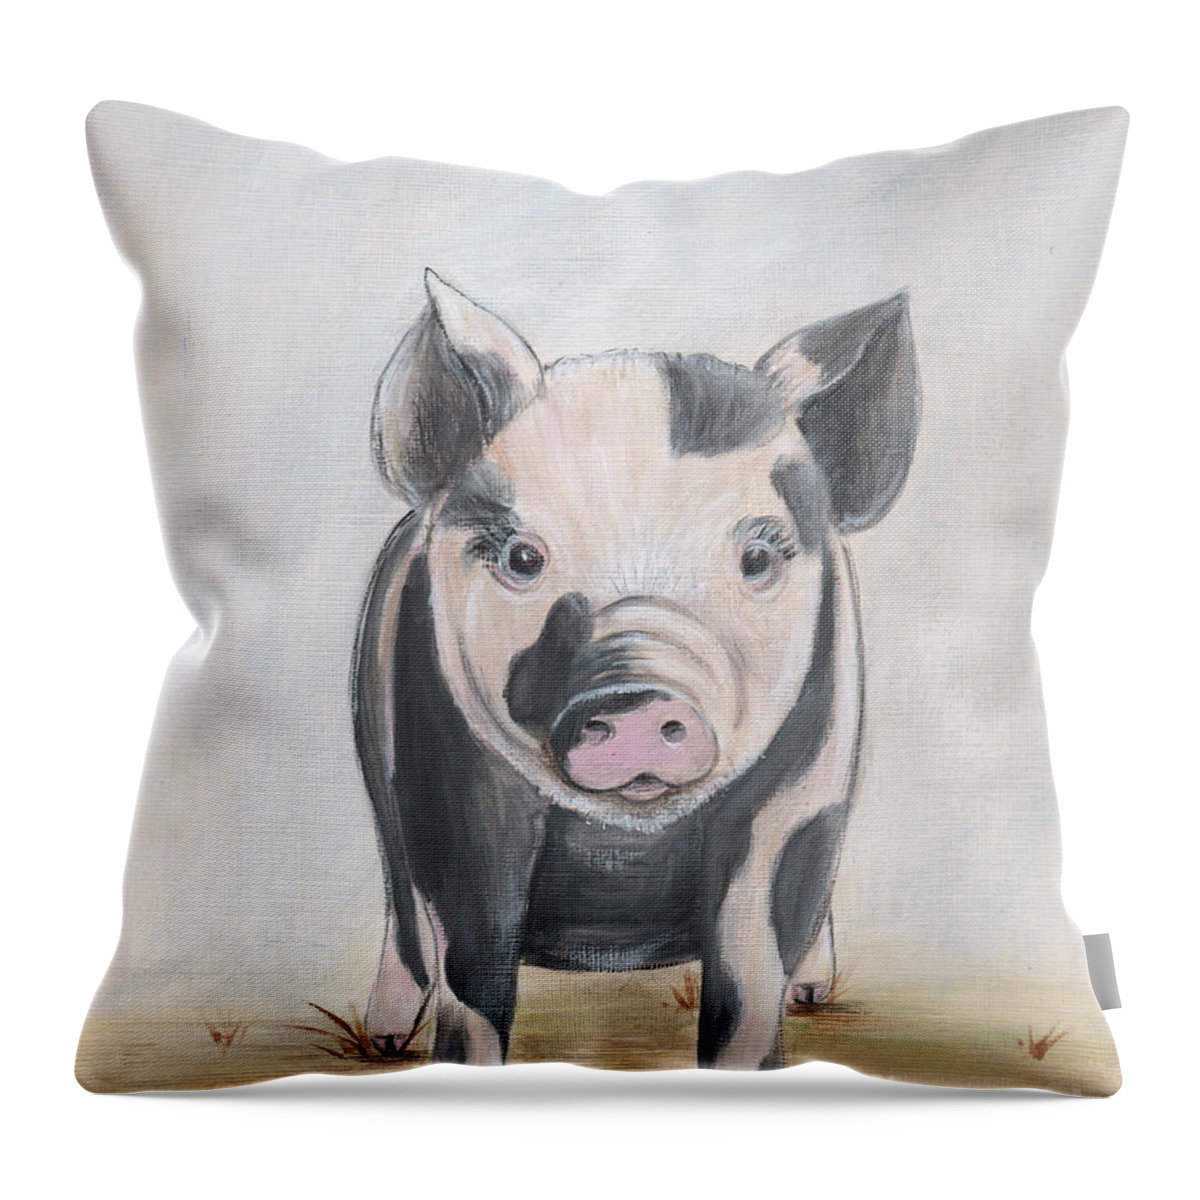 Piglet Throw Pillow featuring the painting Piglet - Farm Animal - Oink by Debbie Cerone